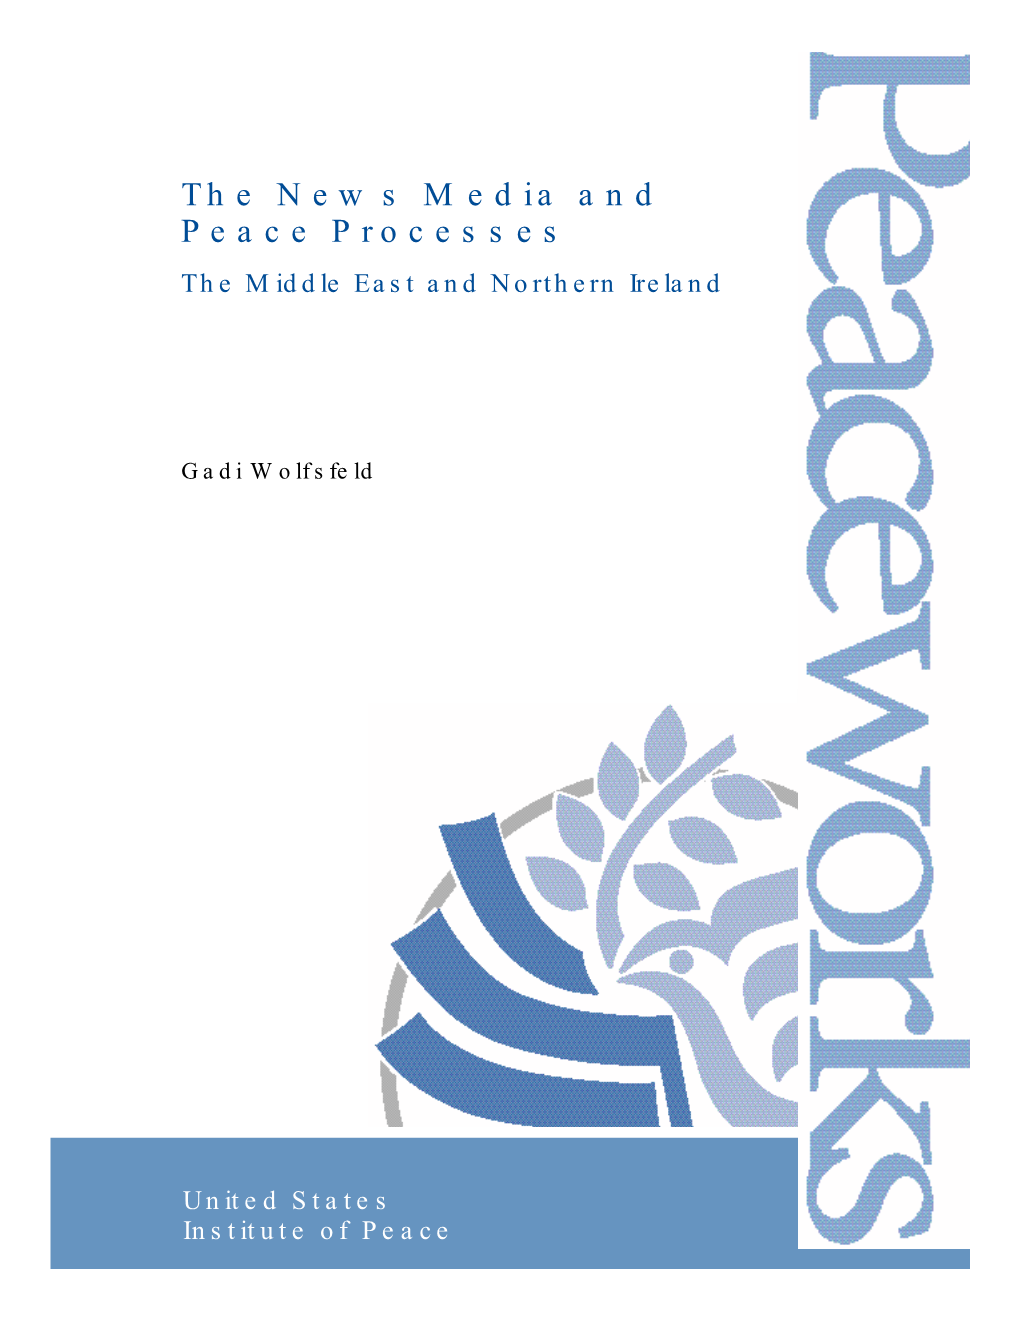 The News Media and Peace Processes: the Middle East and Northern Ireland